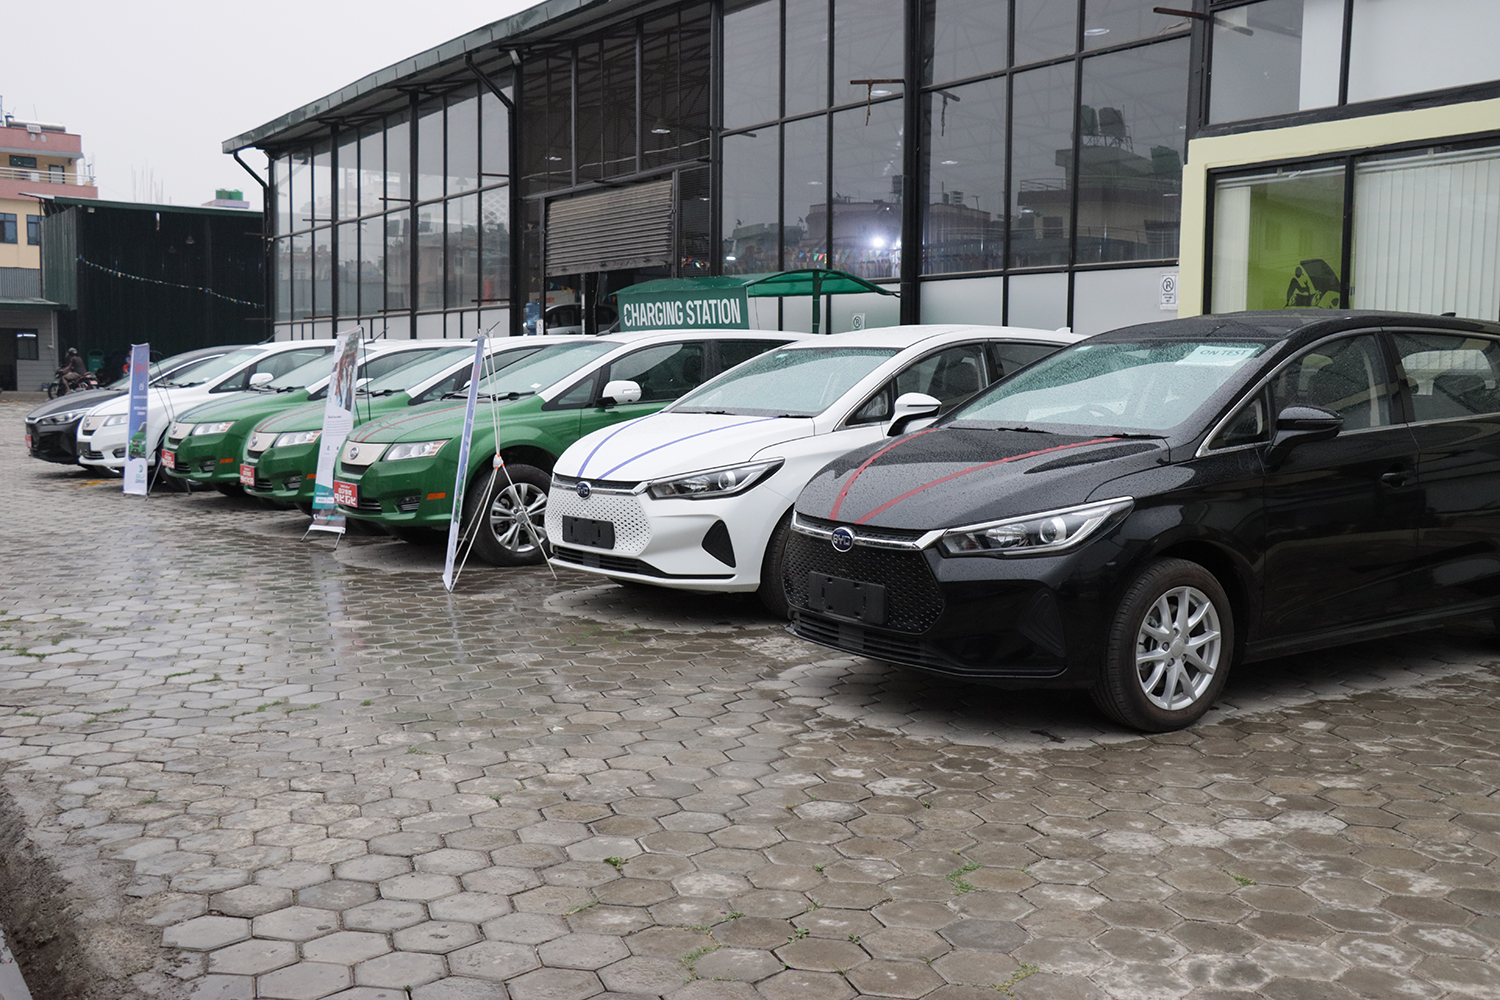 Import ban results in closure of 58 motor dealers across country